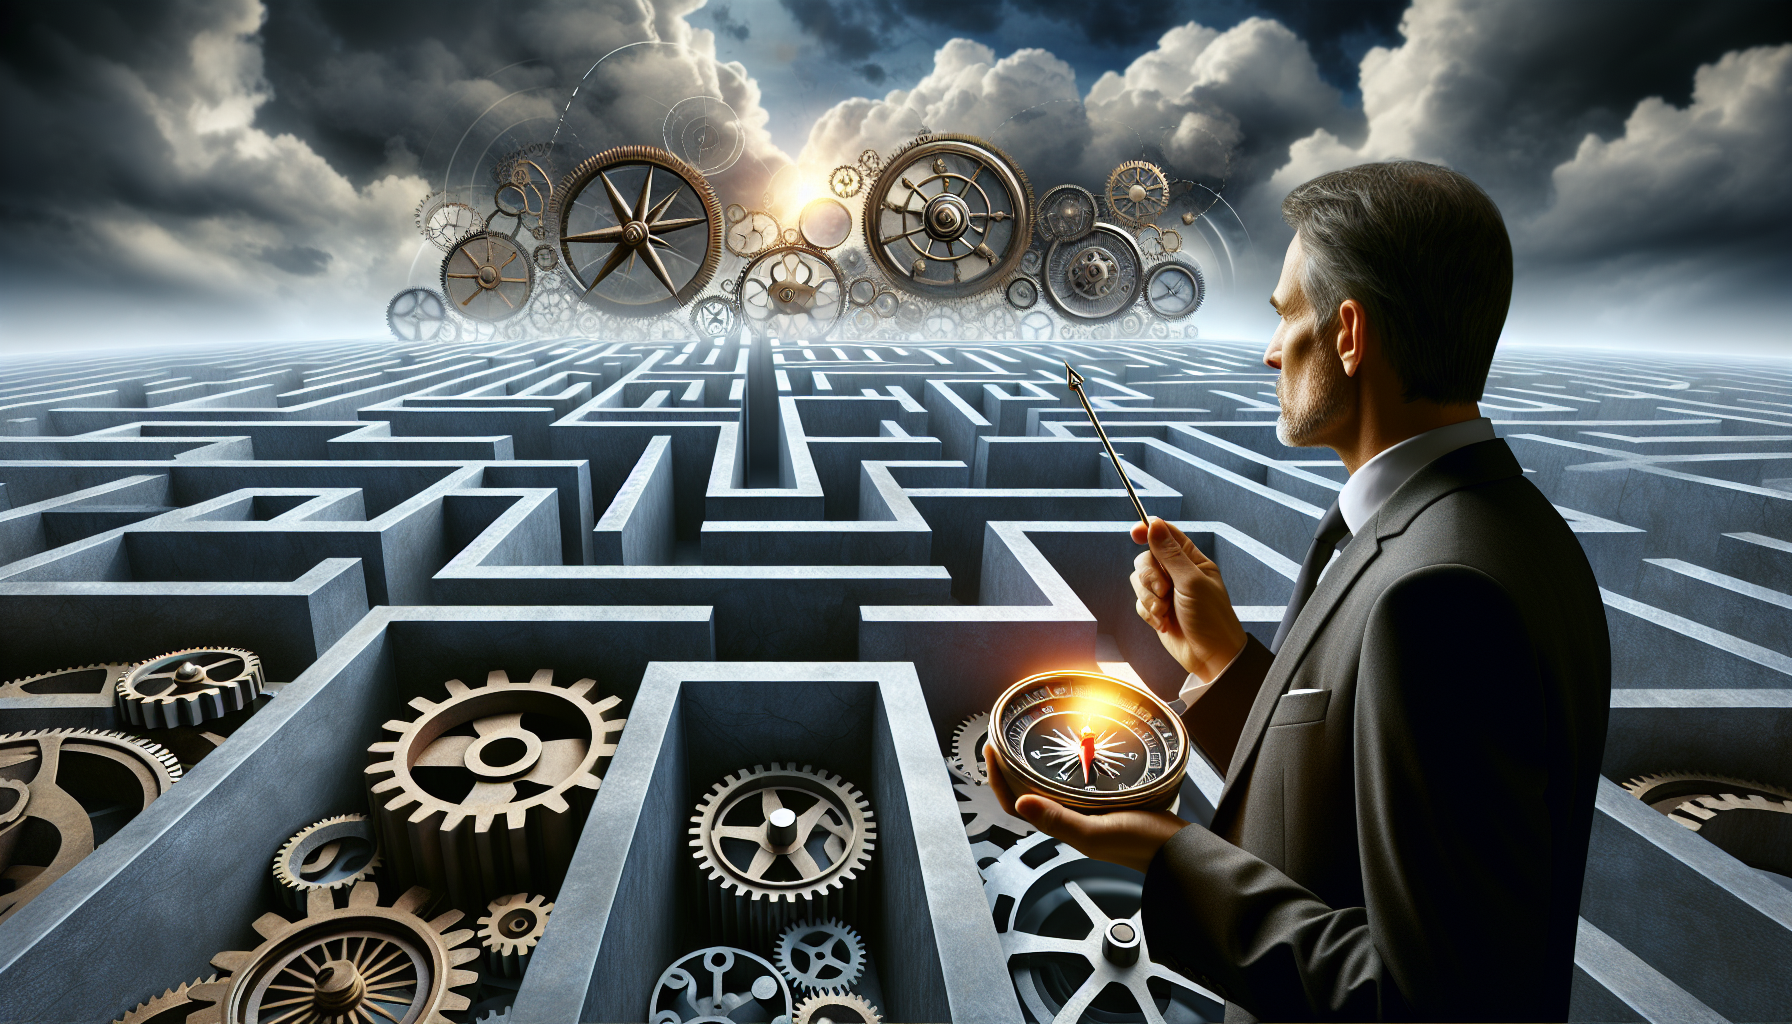 Illustration of a leader navigating through a maze of organizational challenges